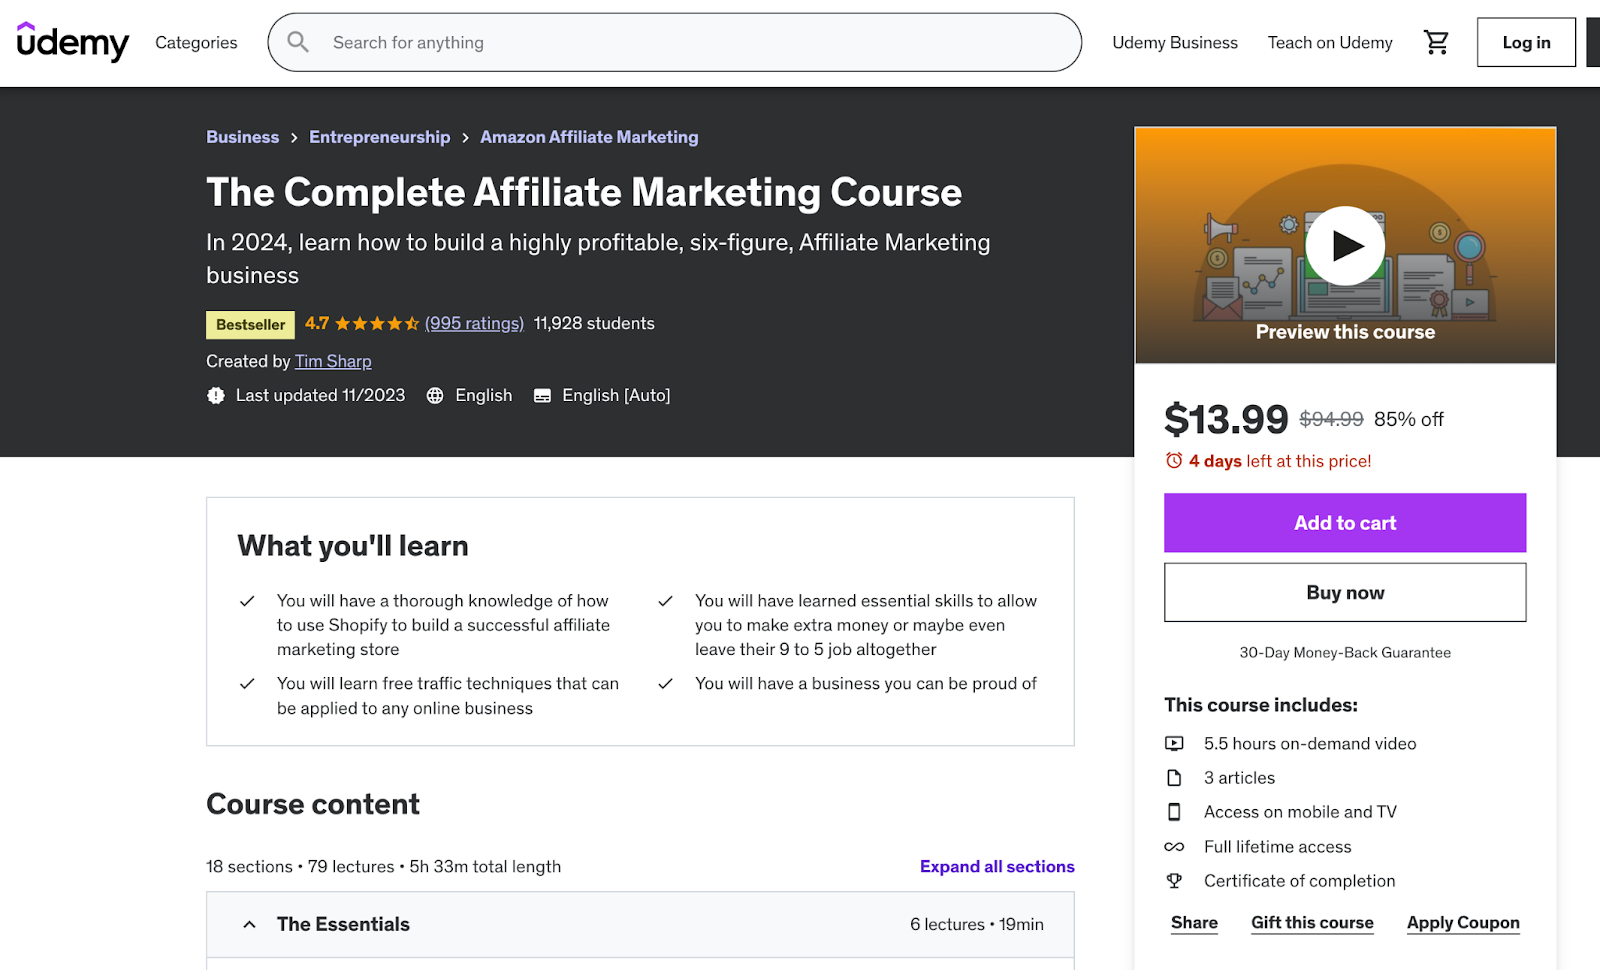 The Complete Affiliate Marketing Course page on Udemy